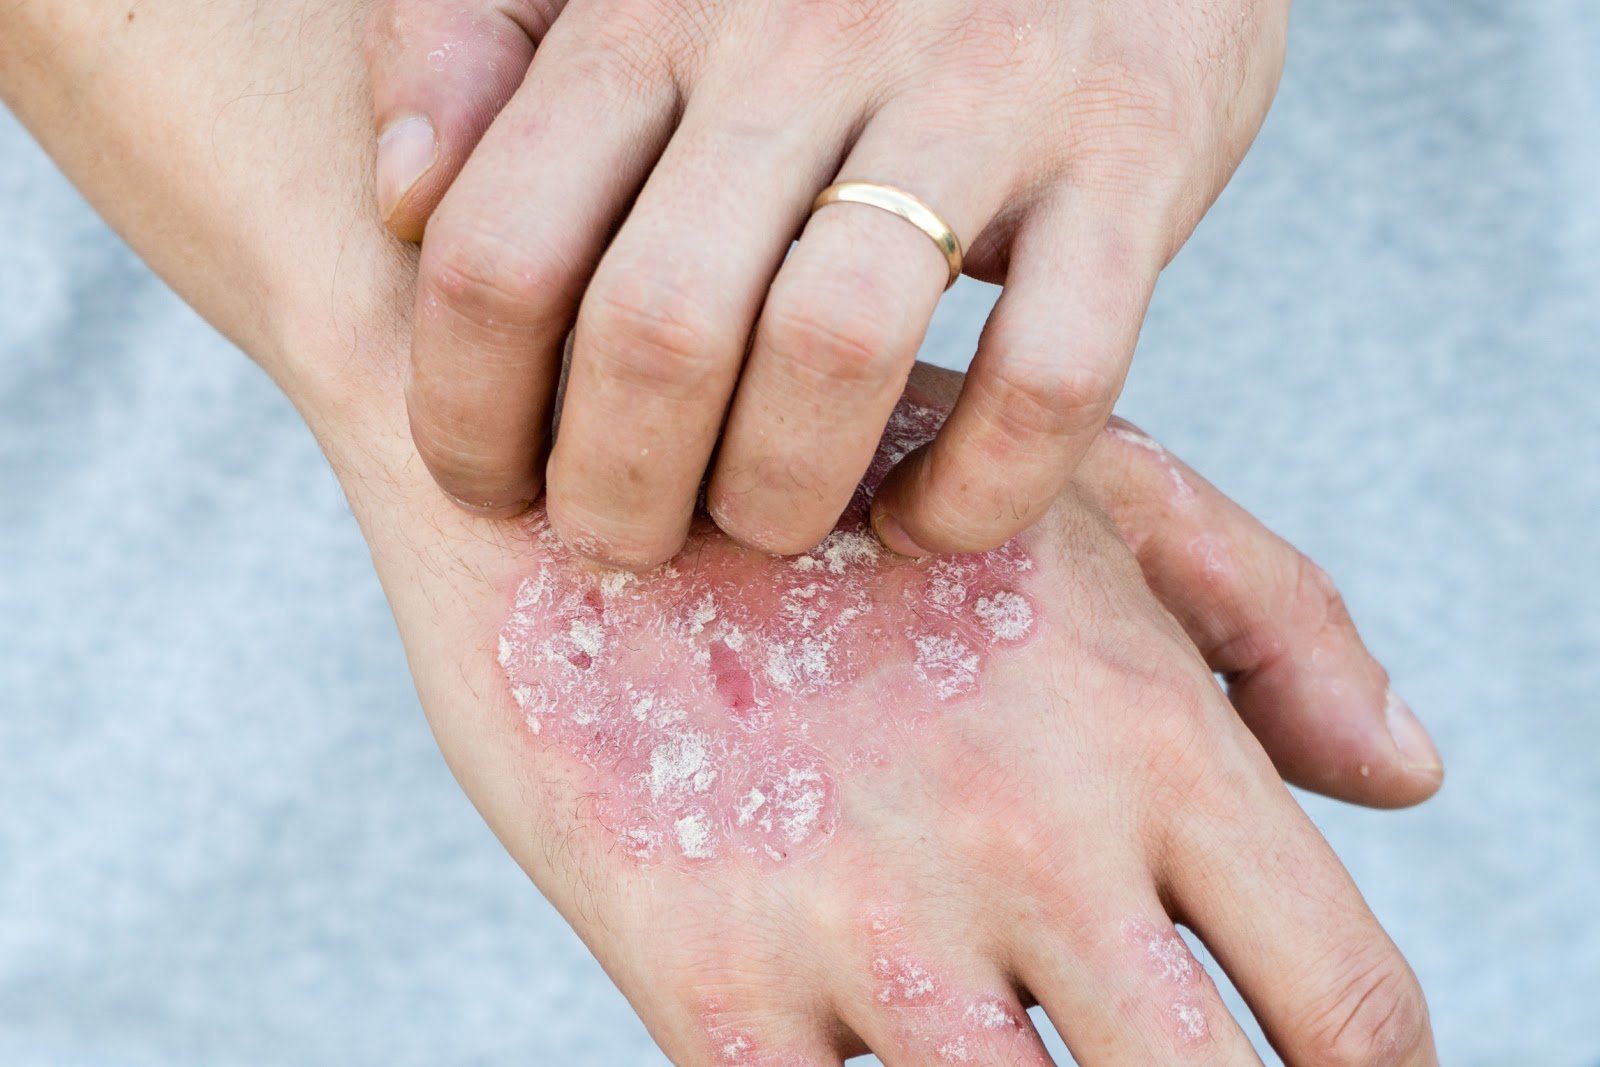 Managing Your Psoriasis Flare